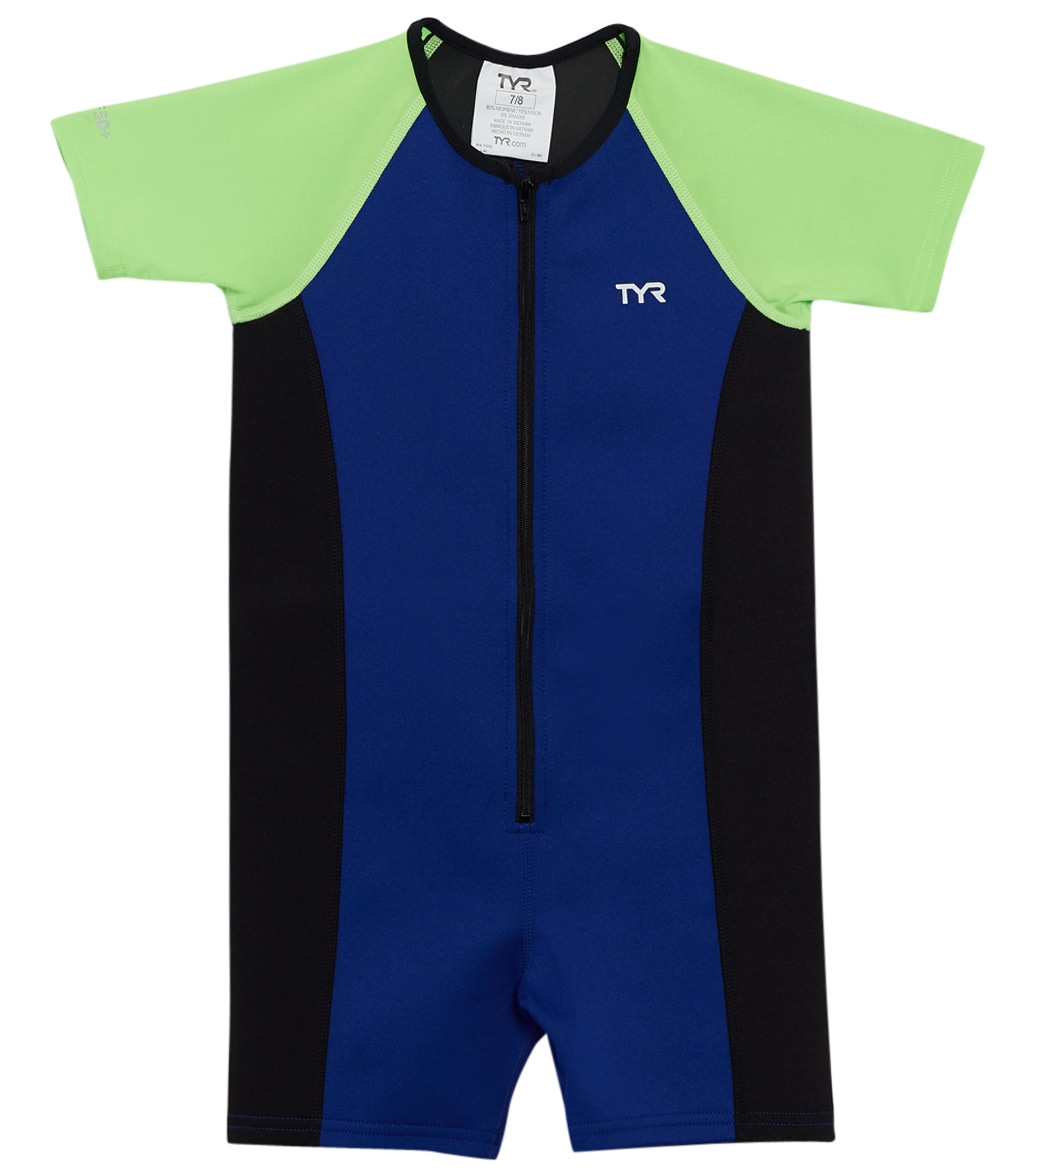 TYR Boys' Upf 50+ Short Sleeve Thermal Suit Toddler - Royal/Lime/Black 4T - Swimoutlet.com